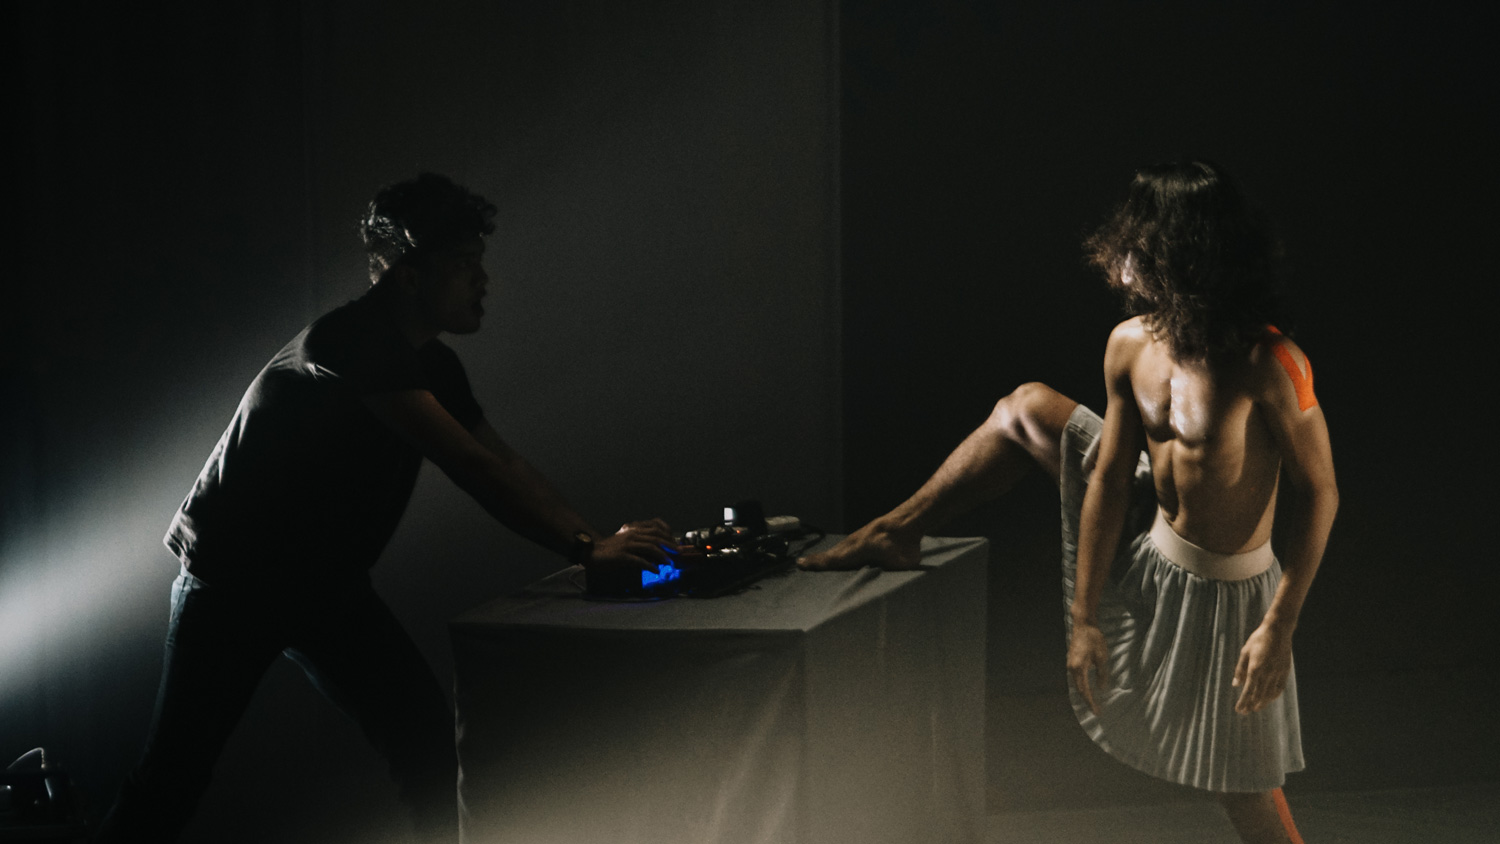 A shirtless person wearing a pleated skirt lifts their leg onto a keyboard behind controlled by a silhouetted figure on a black stage. 